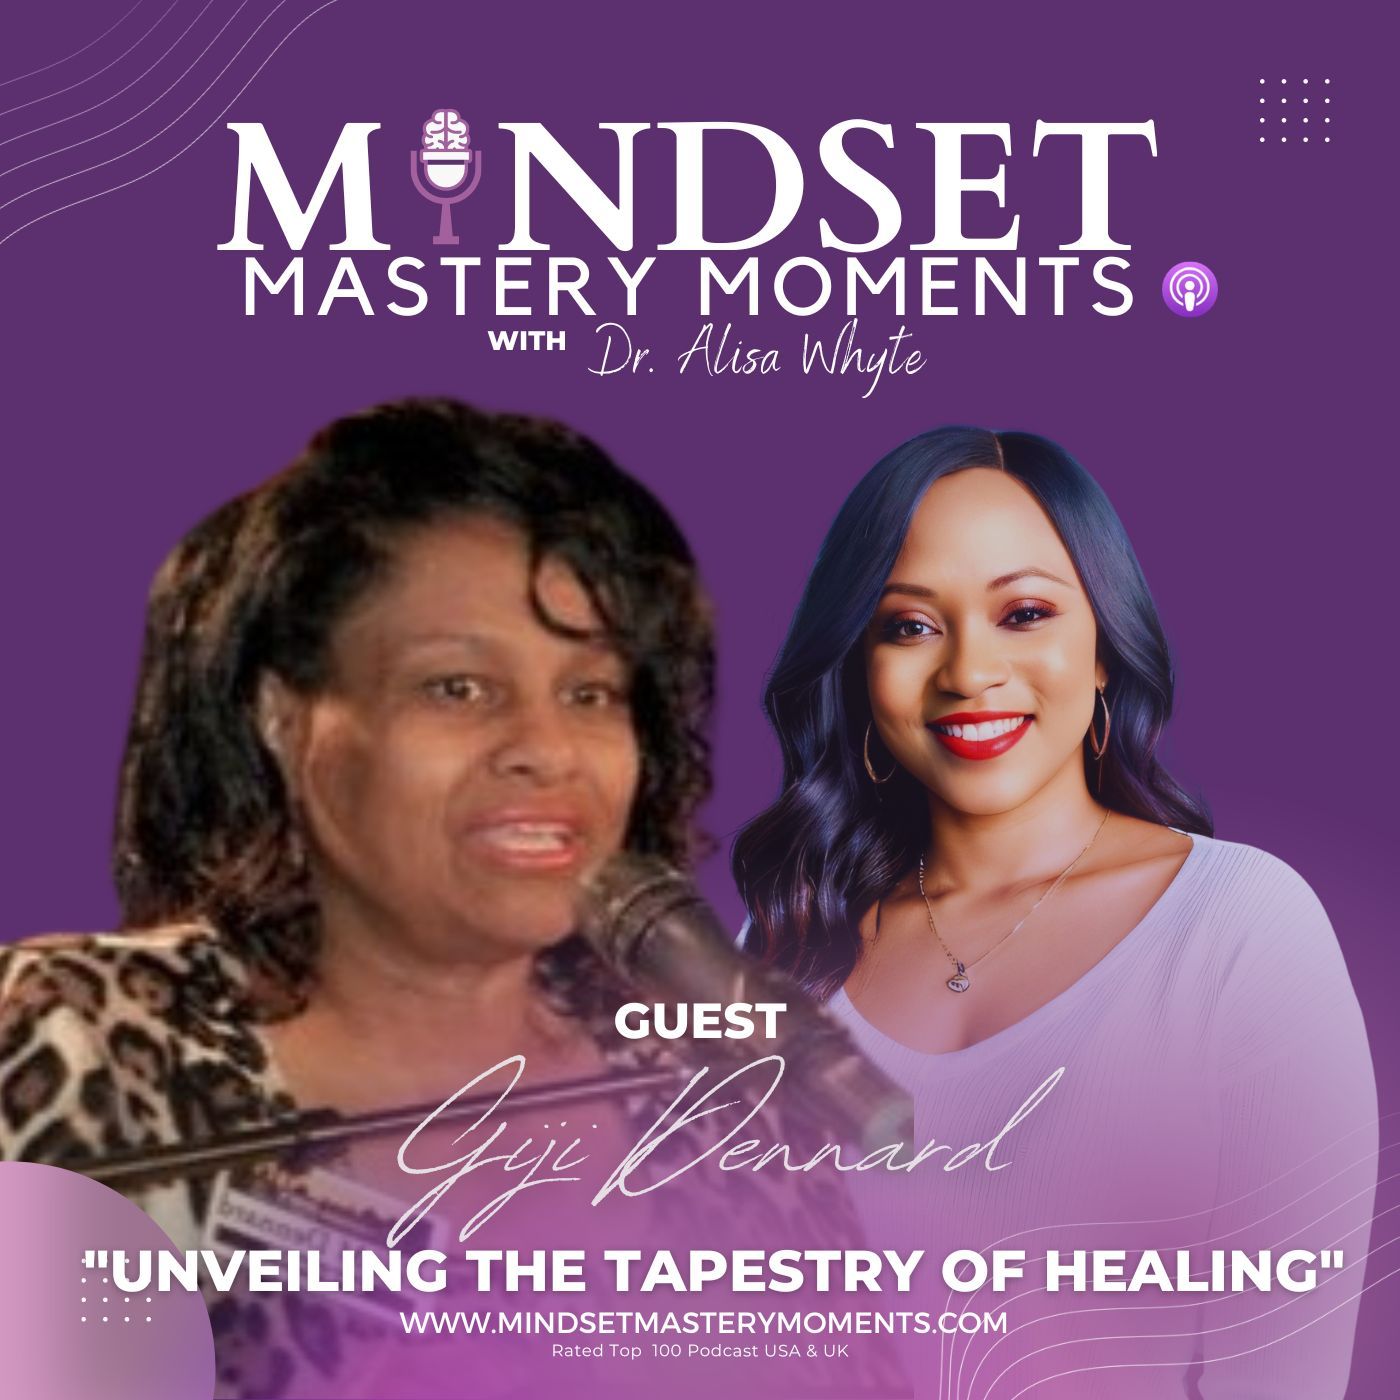 "Unveiling the Tapestry of Healing” with Giji Mischel Dennard" Part 2